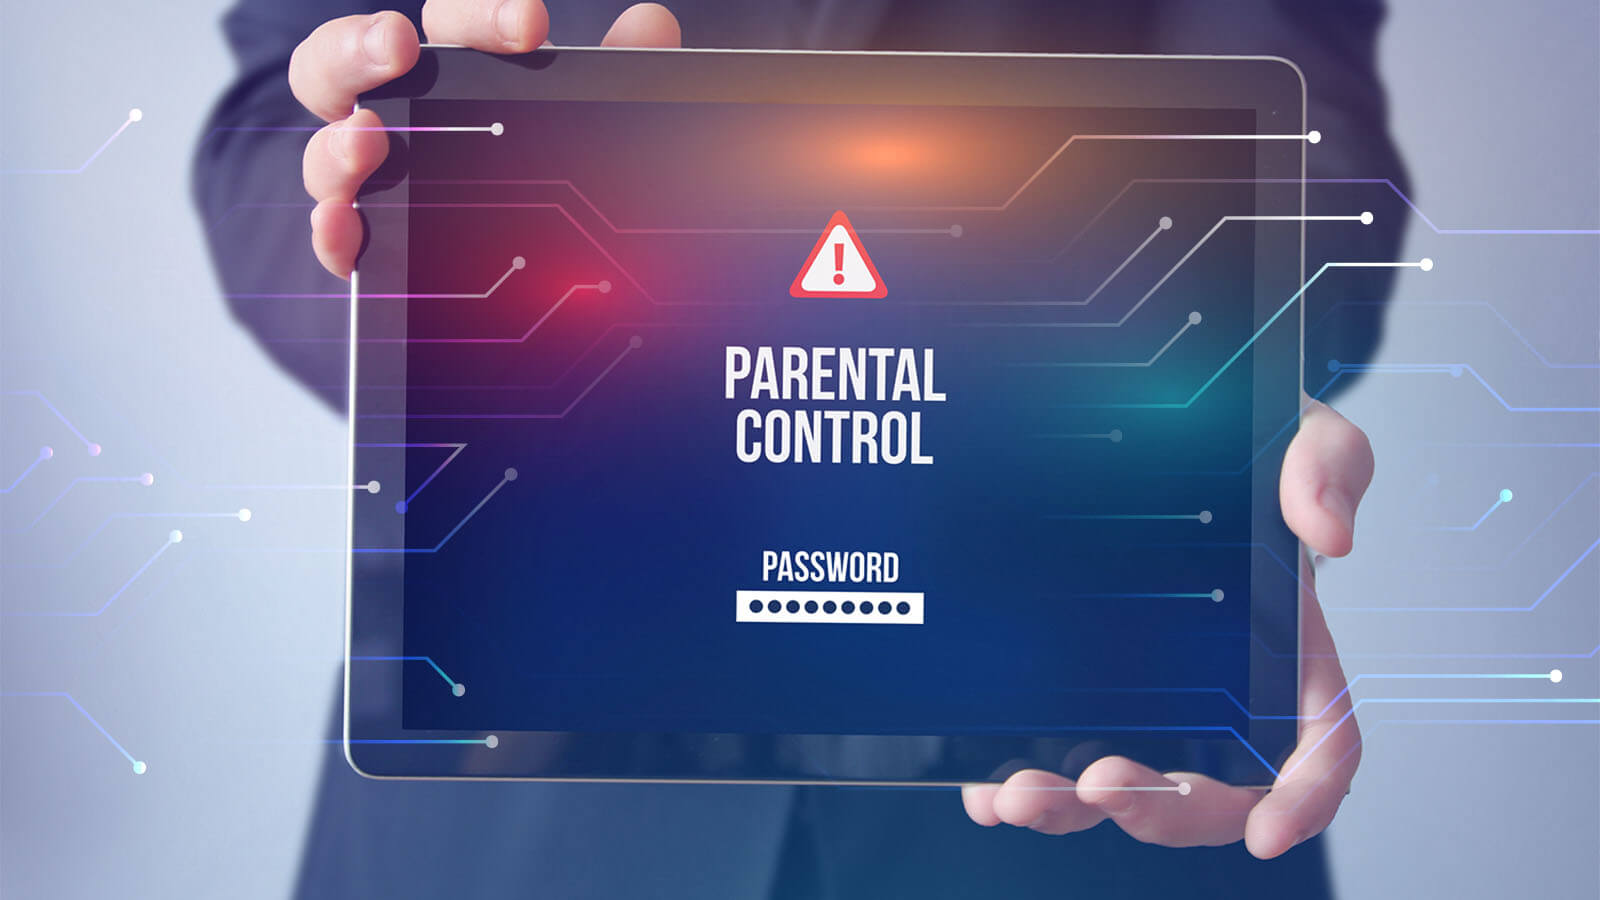 What Can Parents Do to Help Their Children Avoid Developing a Gambling Addiction - Install a Control App